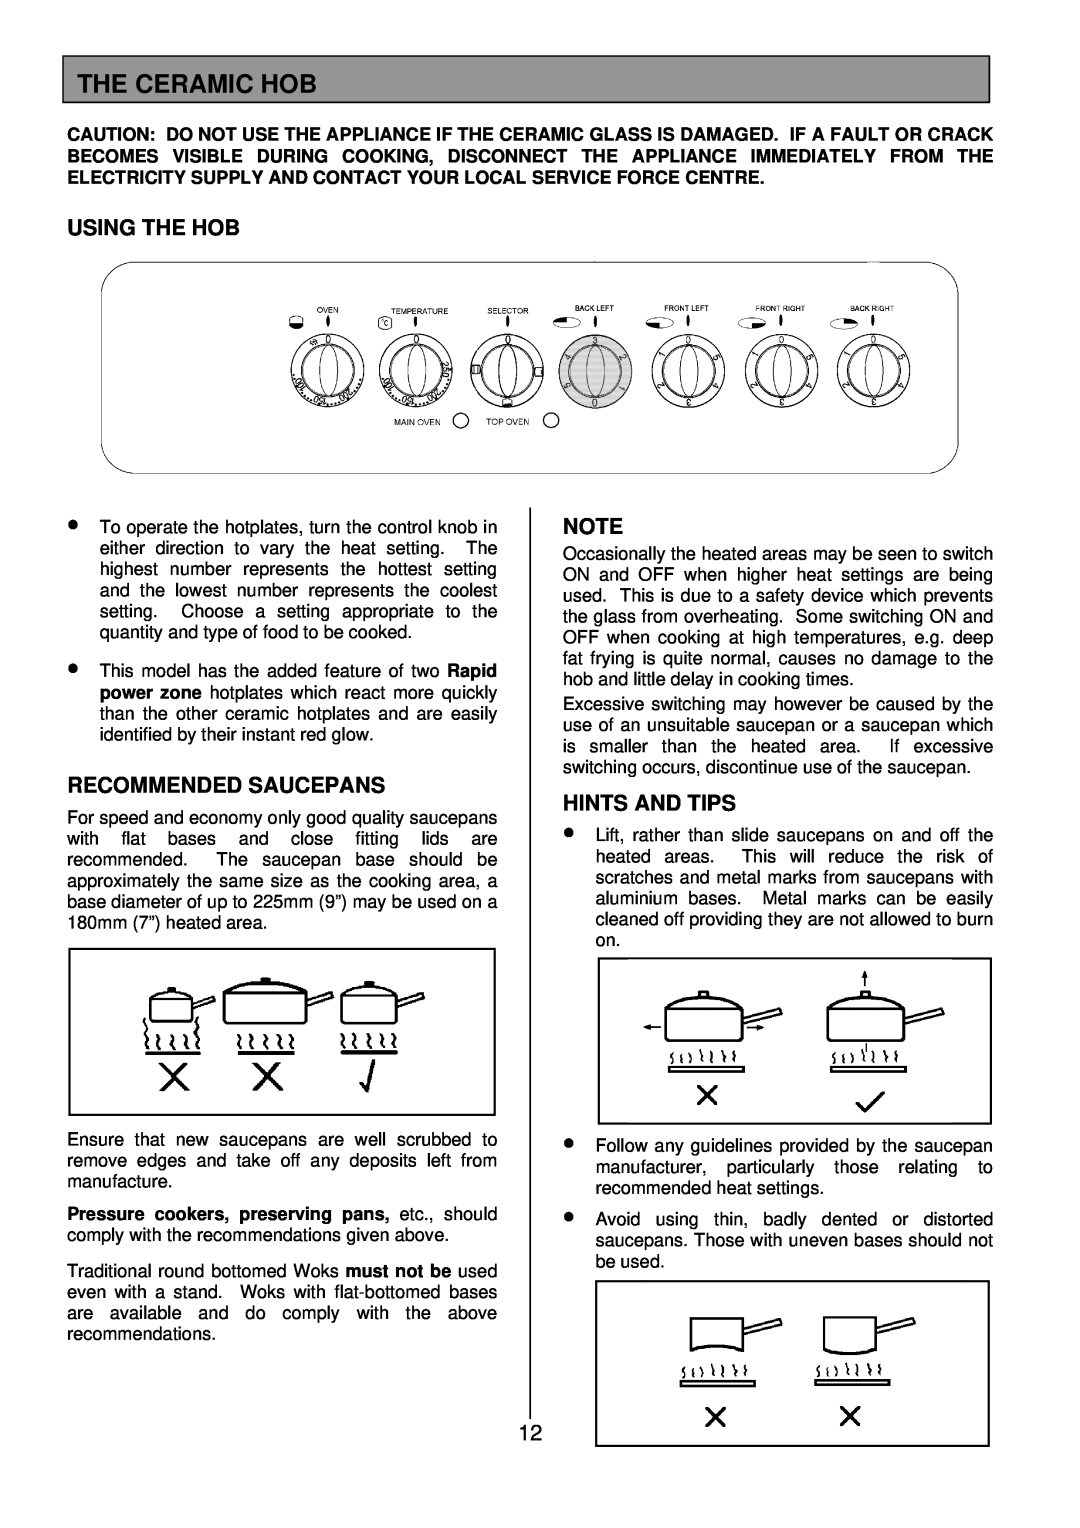 Tricity Bendix SIE501 installation instructions The Ceramic Hob, Using The Hob, Recommended Saucepans, Hints And Tips 